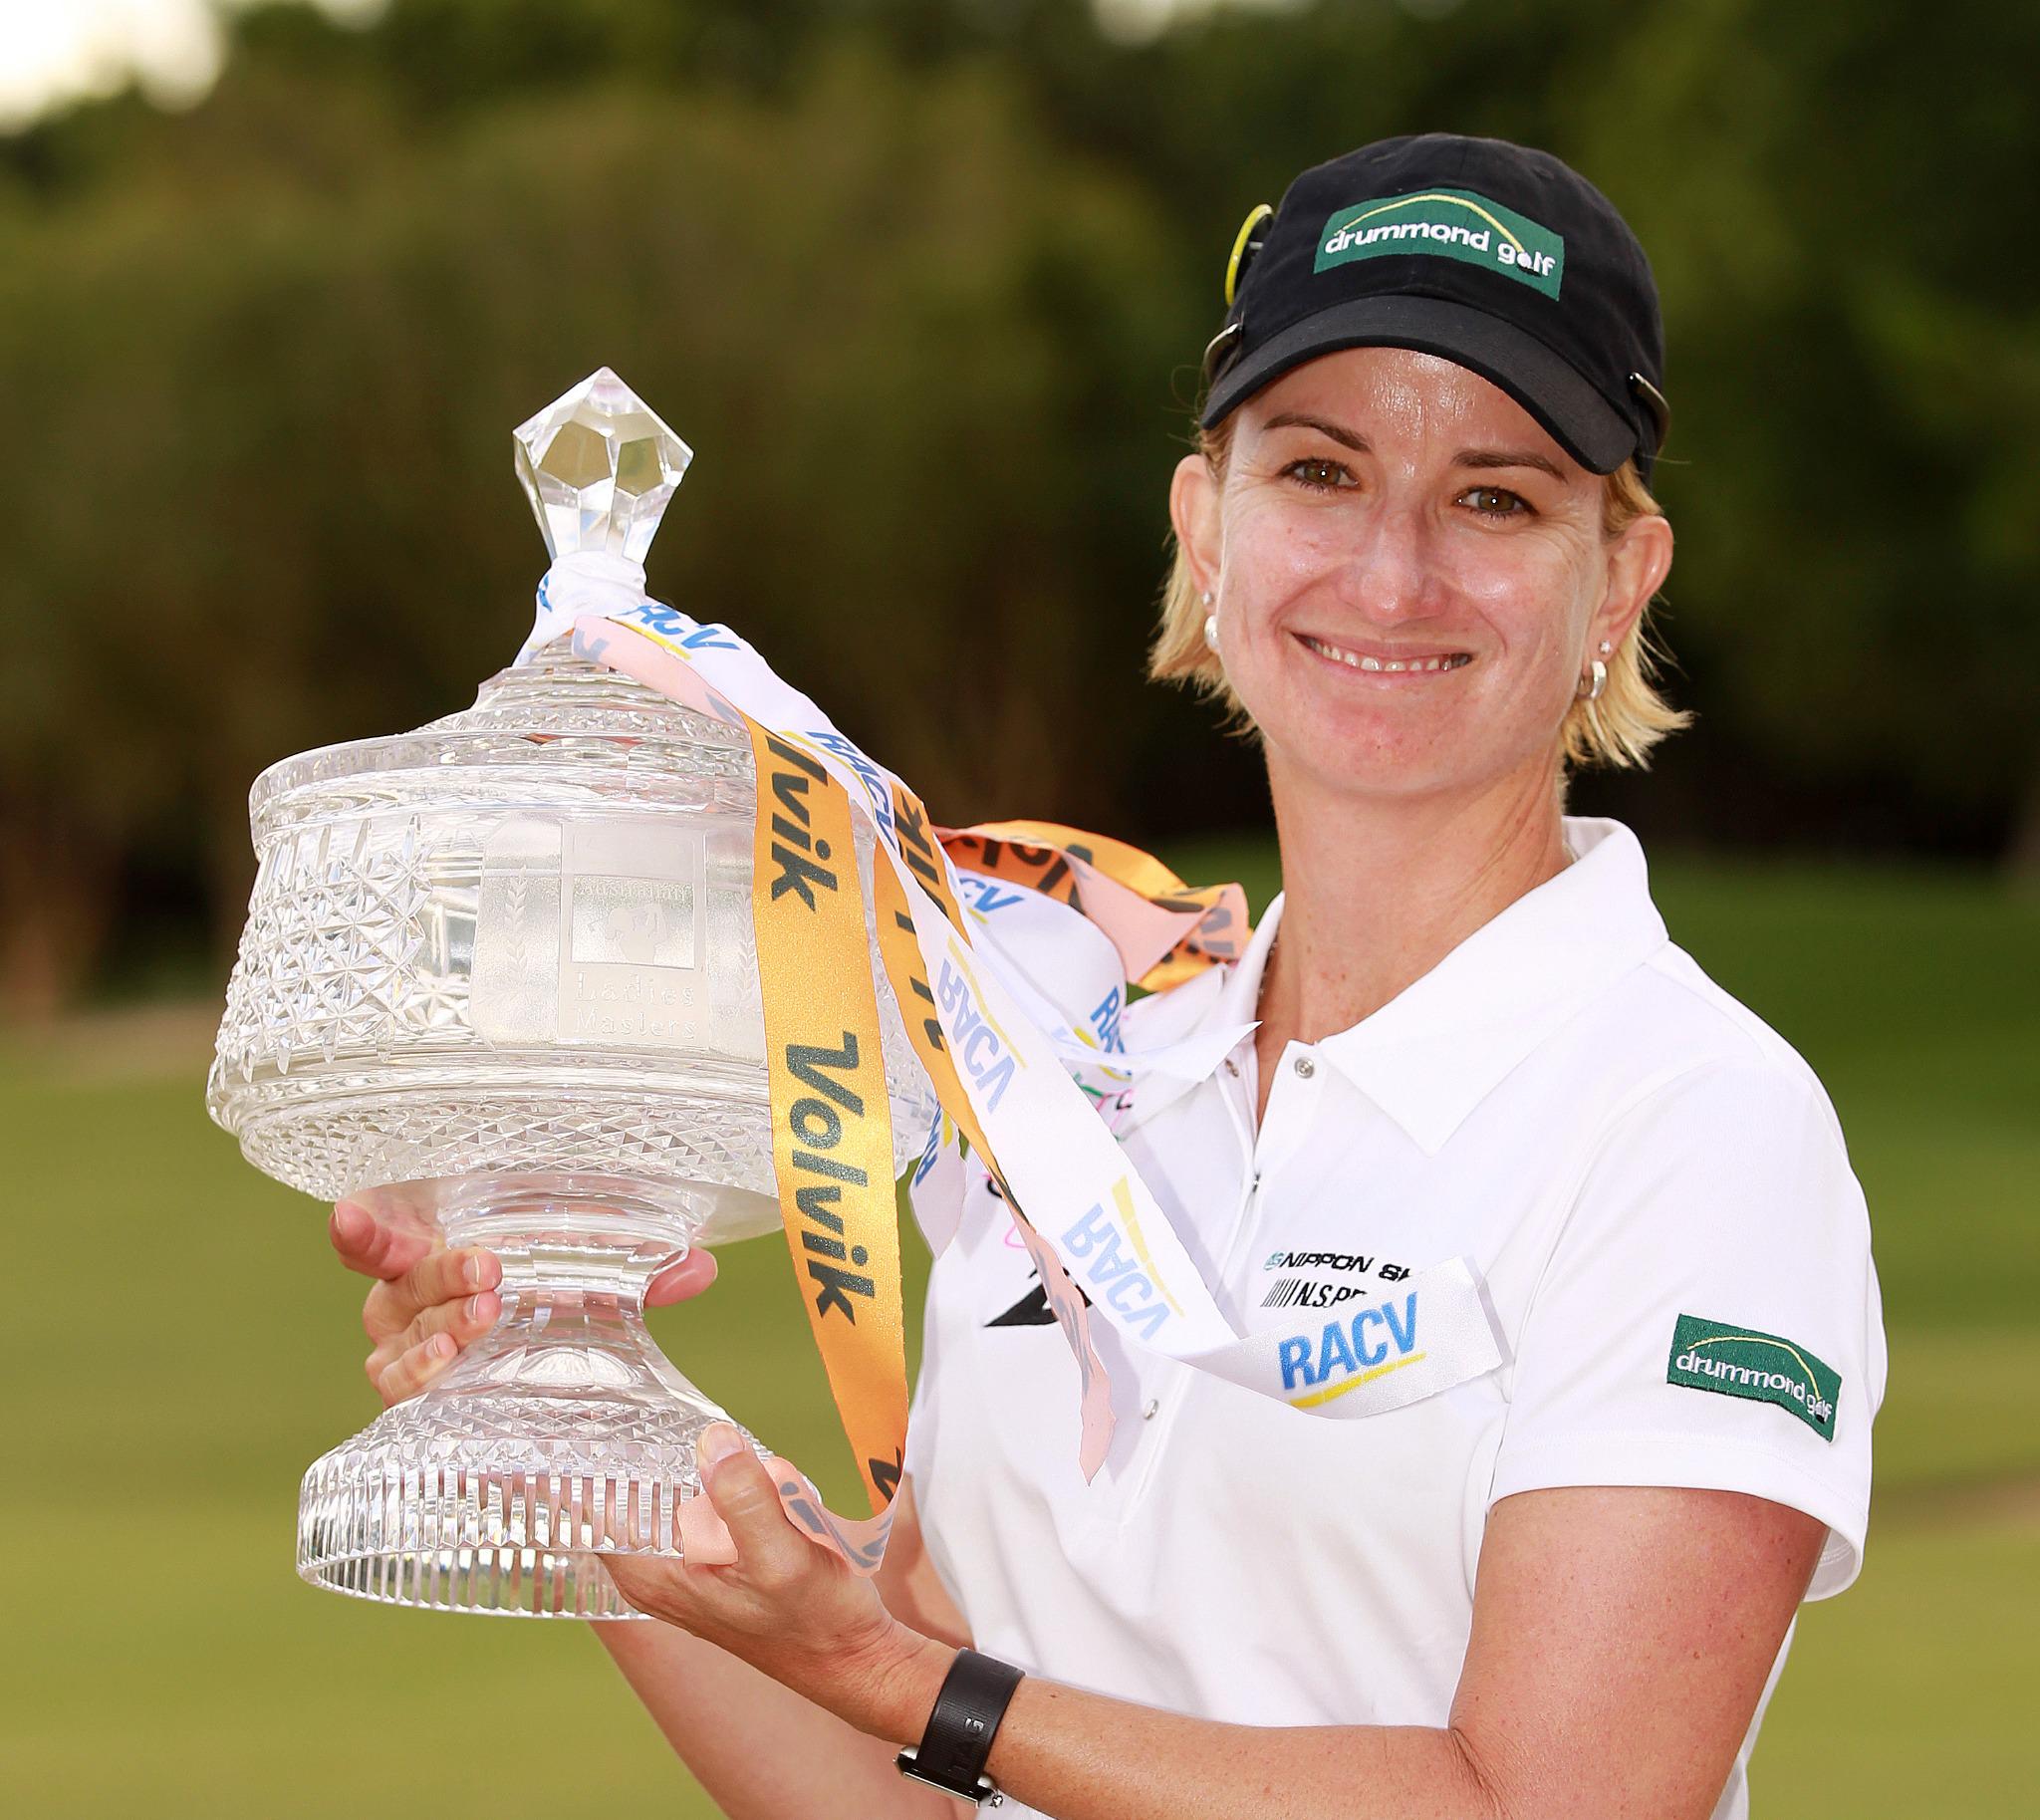 Happy Birthday to Karrie Webb, who turns 40 today! 